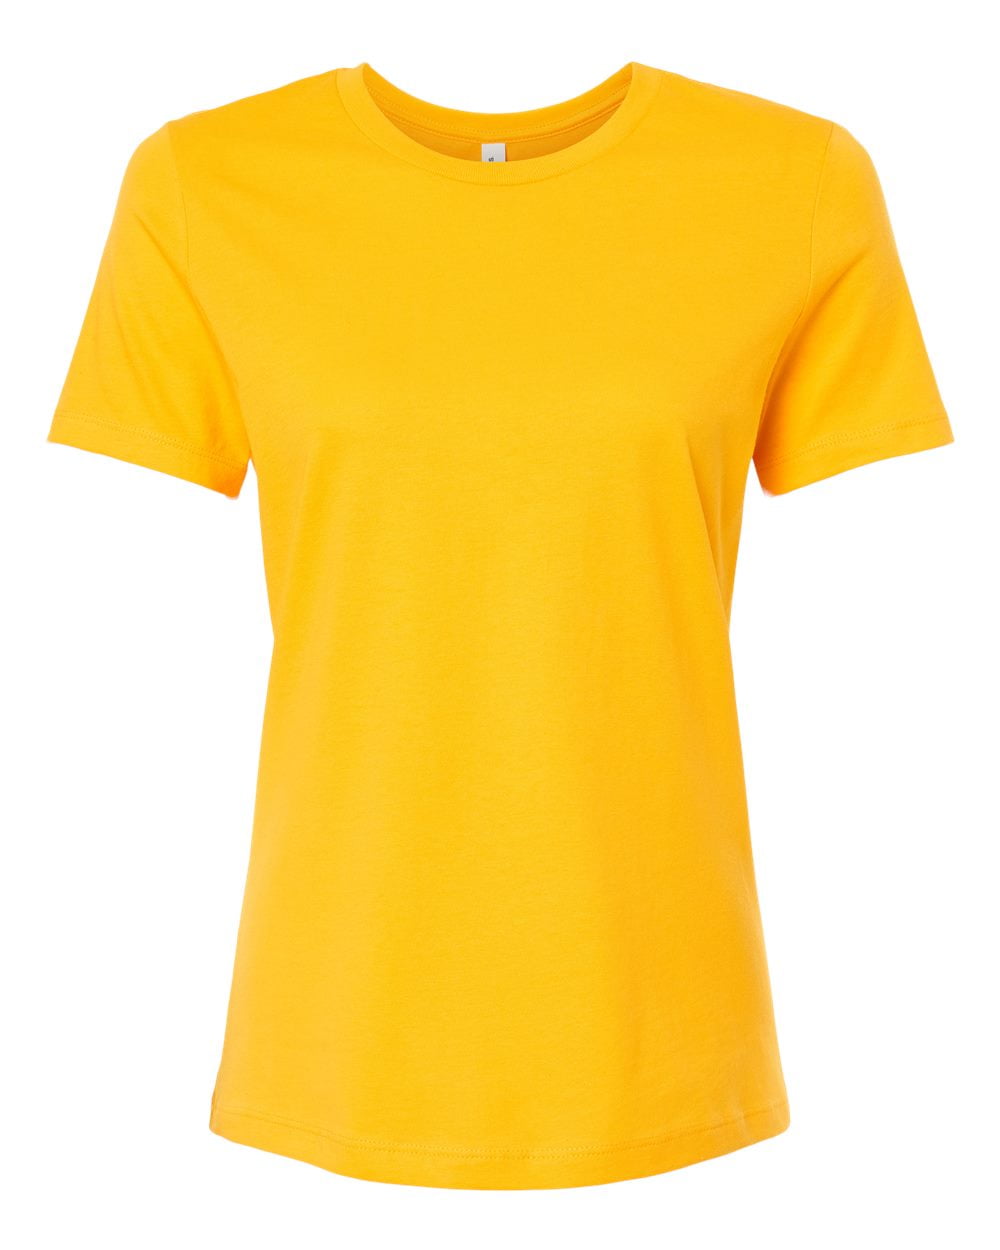 BELLA + CANVAS Women’s Relaxed Jersey Tee Size up to 3XL - Walmart.com